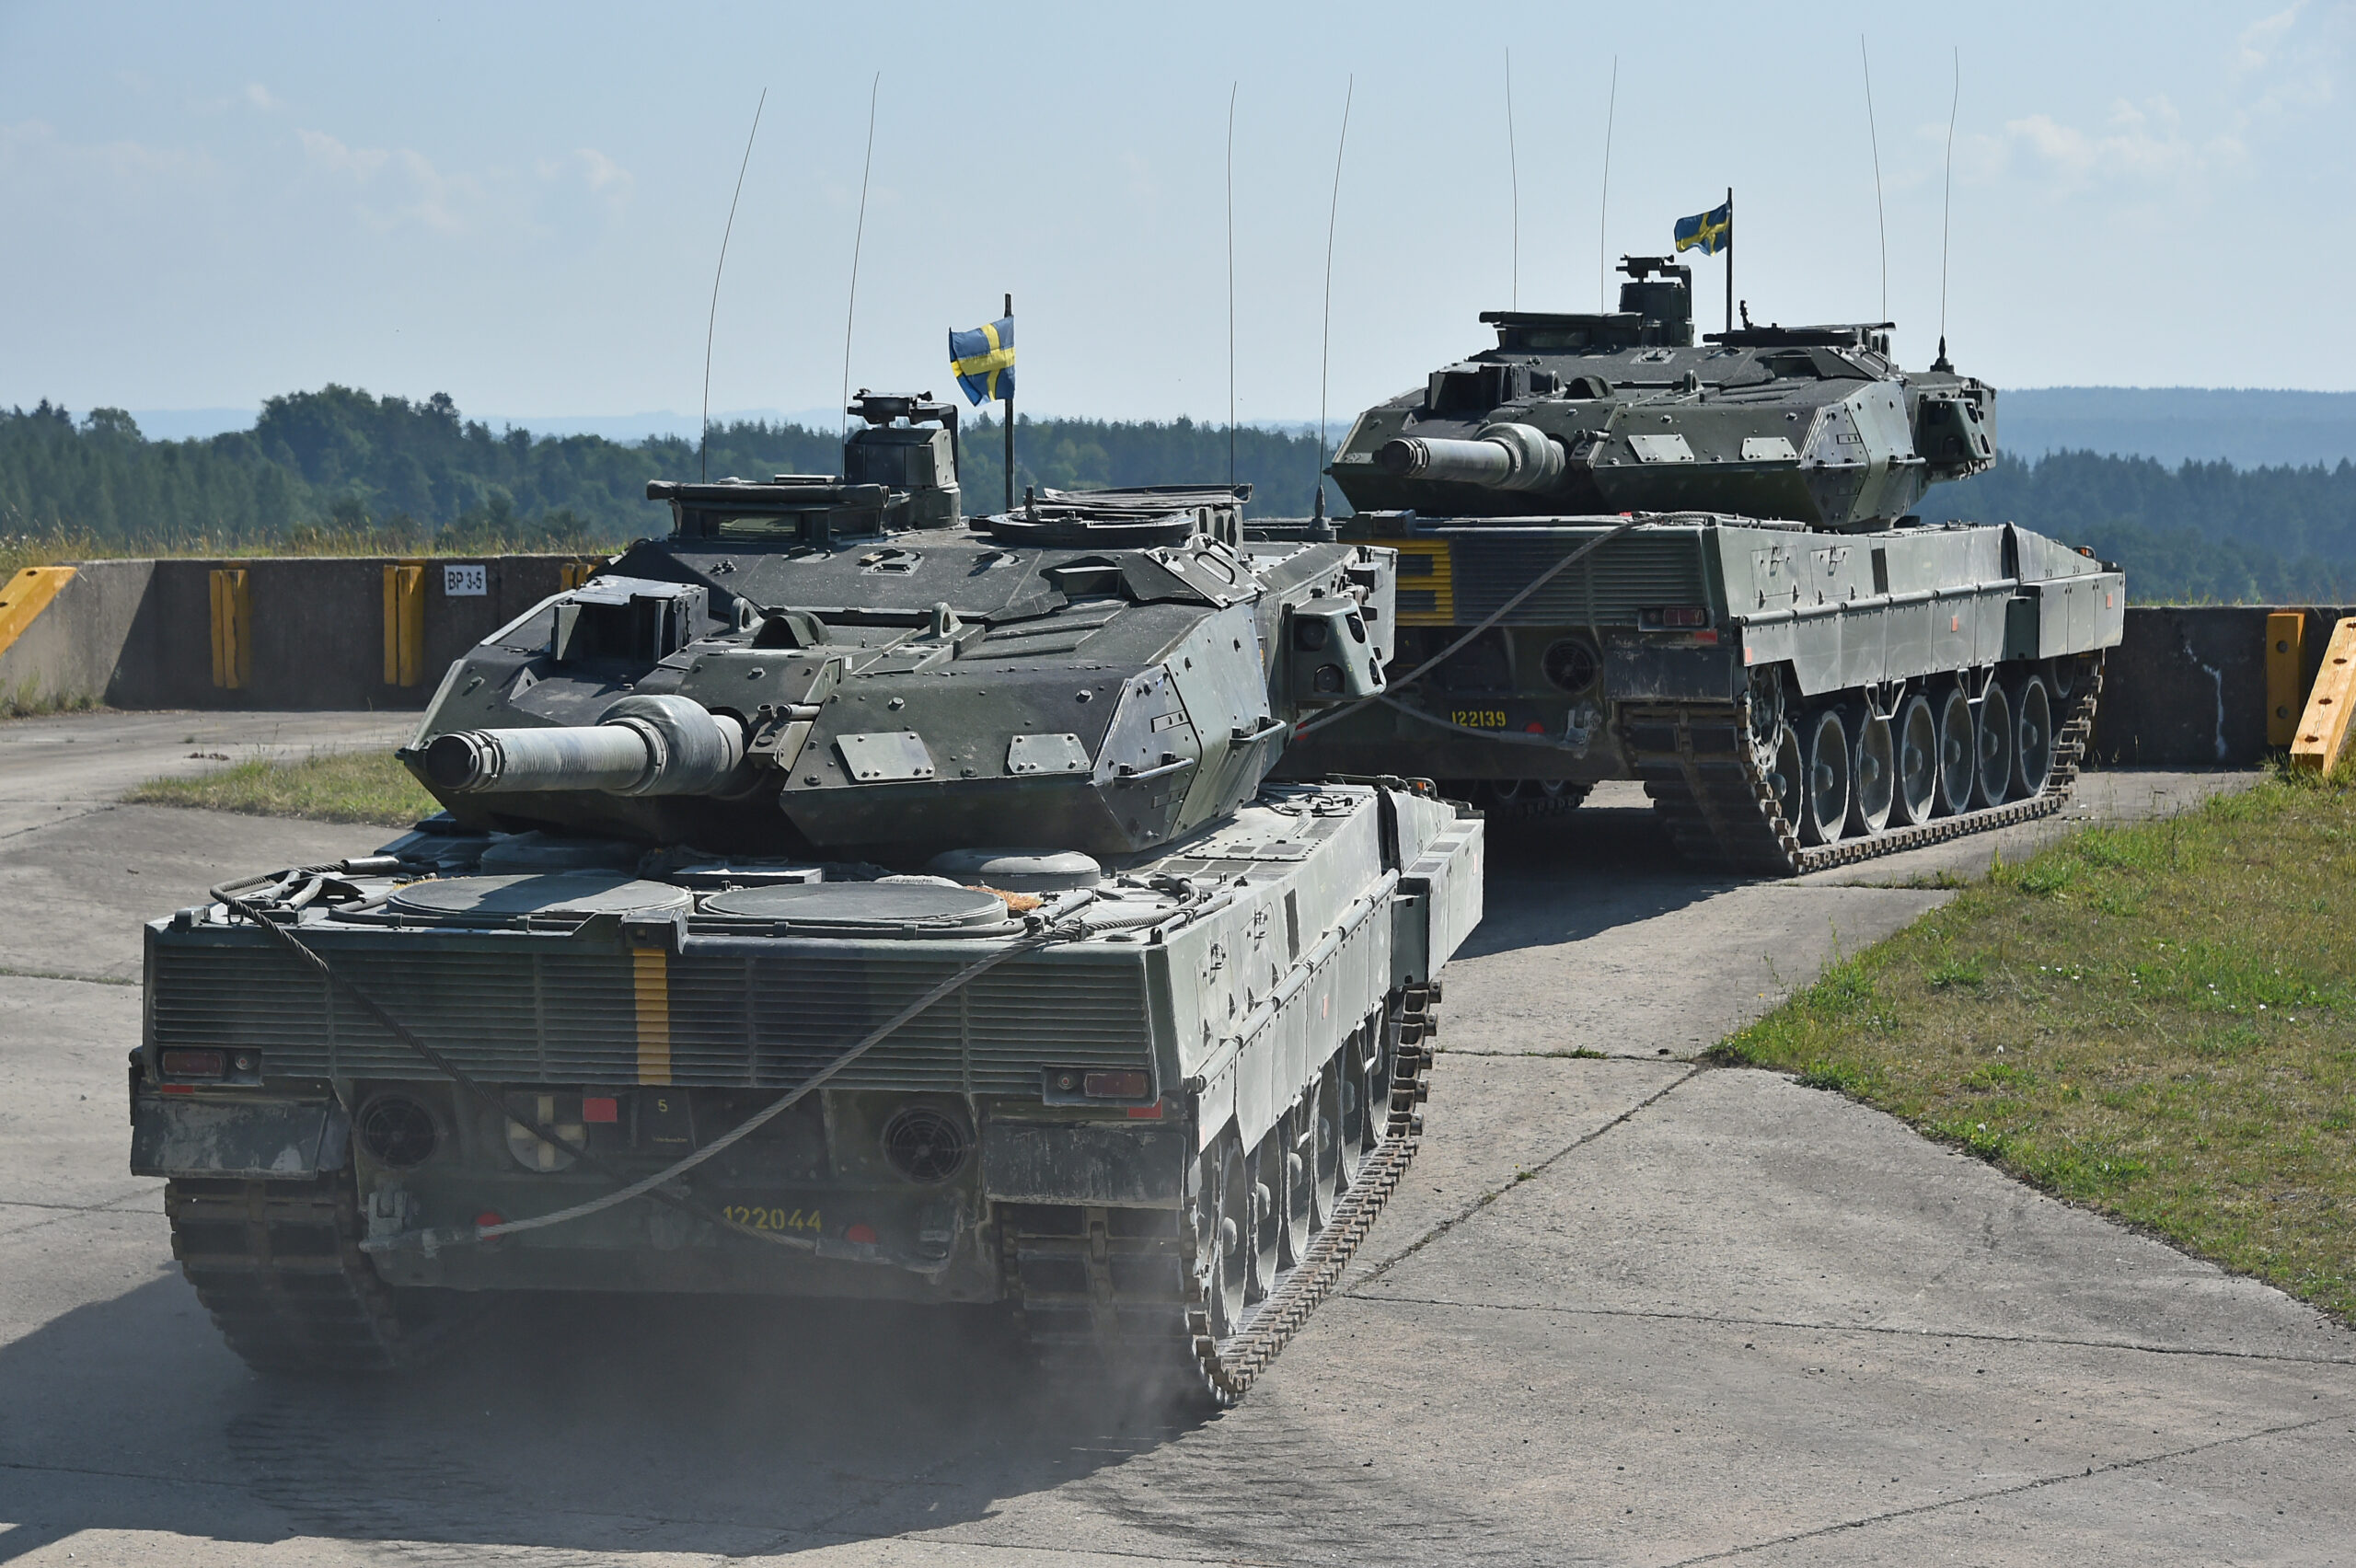 Swedish soldiers with the Wartofta Tank Company, Skaraborg Regiment in their Stridsvagn 122 main battle tank tow away another tank as part of the Chemical, Biological, Radiological, Nuclear, and Explosive Agents lane during the Strong Europe Tank Challenge at the 7th Army Training Command’s Grafenwoehr Training Area, June 4, 2018. The U.S. Army Europe and the German Army co-host the third Strong Europe Tank Challenge, which is an annual training event designed to give participating nations a dynamic, productive and fun environment in which to foster military partnerships, form Soldier-level relationships, and share tactics, techniques and procedures. (U.S. Army photo by Gertrud Zach)